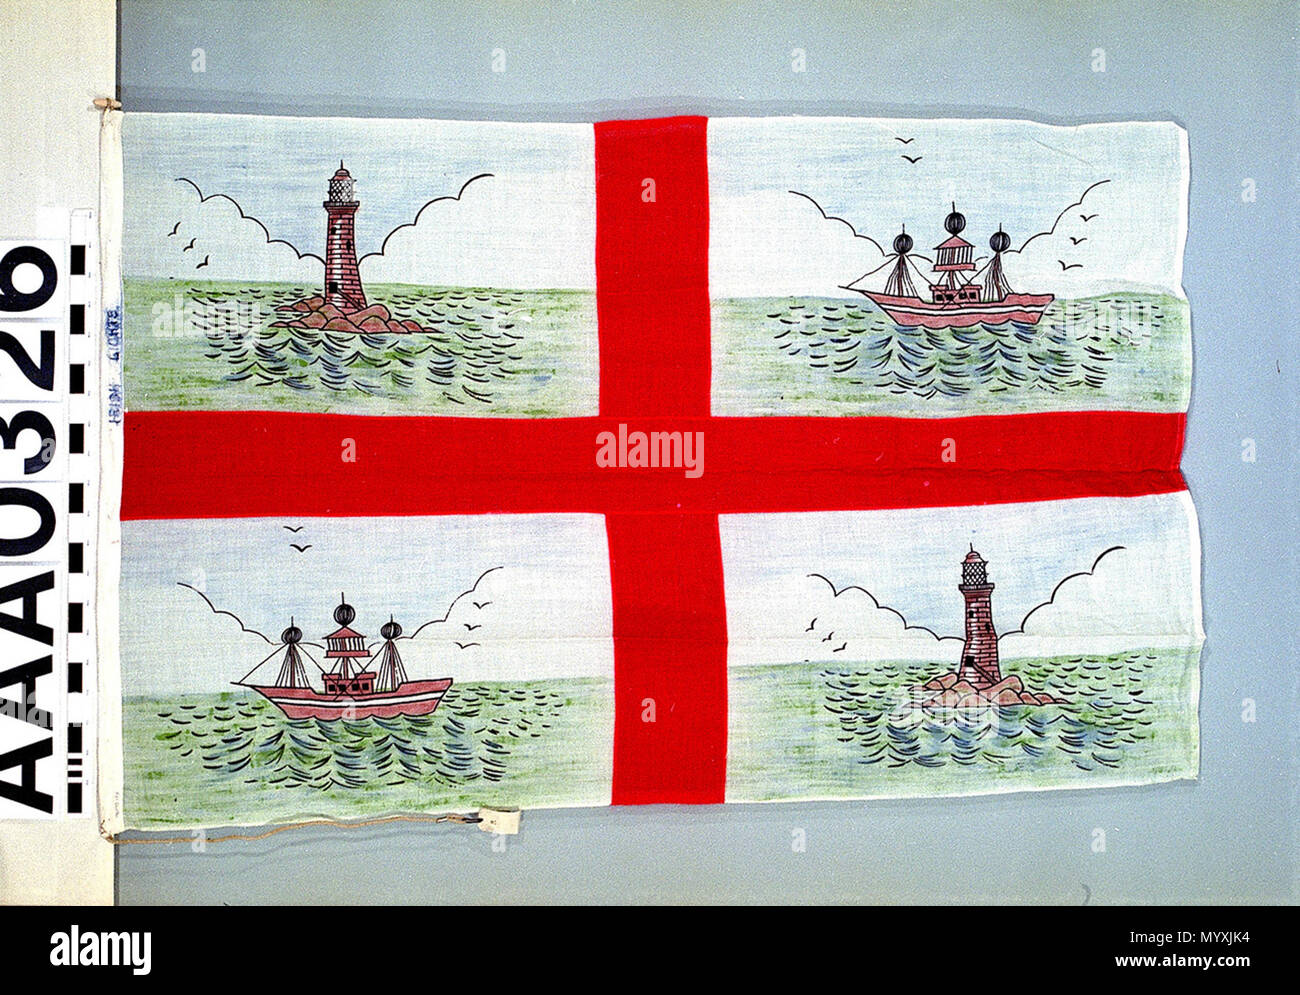 .  English: Flag, Irish Lights Commissioners The flag of the Irish Lights Commissioners. It is made in synthetic fibre bunting and is machine-sewn. The design consists of a red St George's cross on a white background with a painted lighthouse and lightship in alternate cantons. Marked in ink on the hoist: 'IRISH LIGHTS'. The flag has a rope and toggle attached. The new version of this flag, introduced in September 1970, has the cross of St Patrick instead of that of St George. The Irish Lights Commissioners is the lighthouse authority for all the island of Ireland, its adjacent seas and island Stock Photo